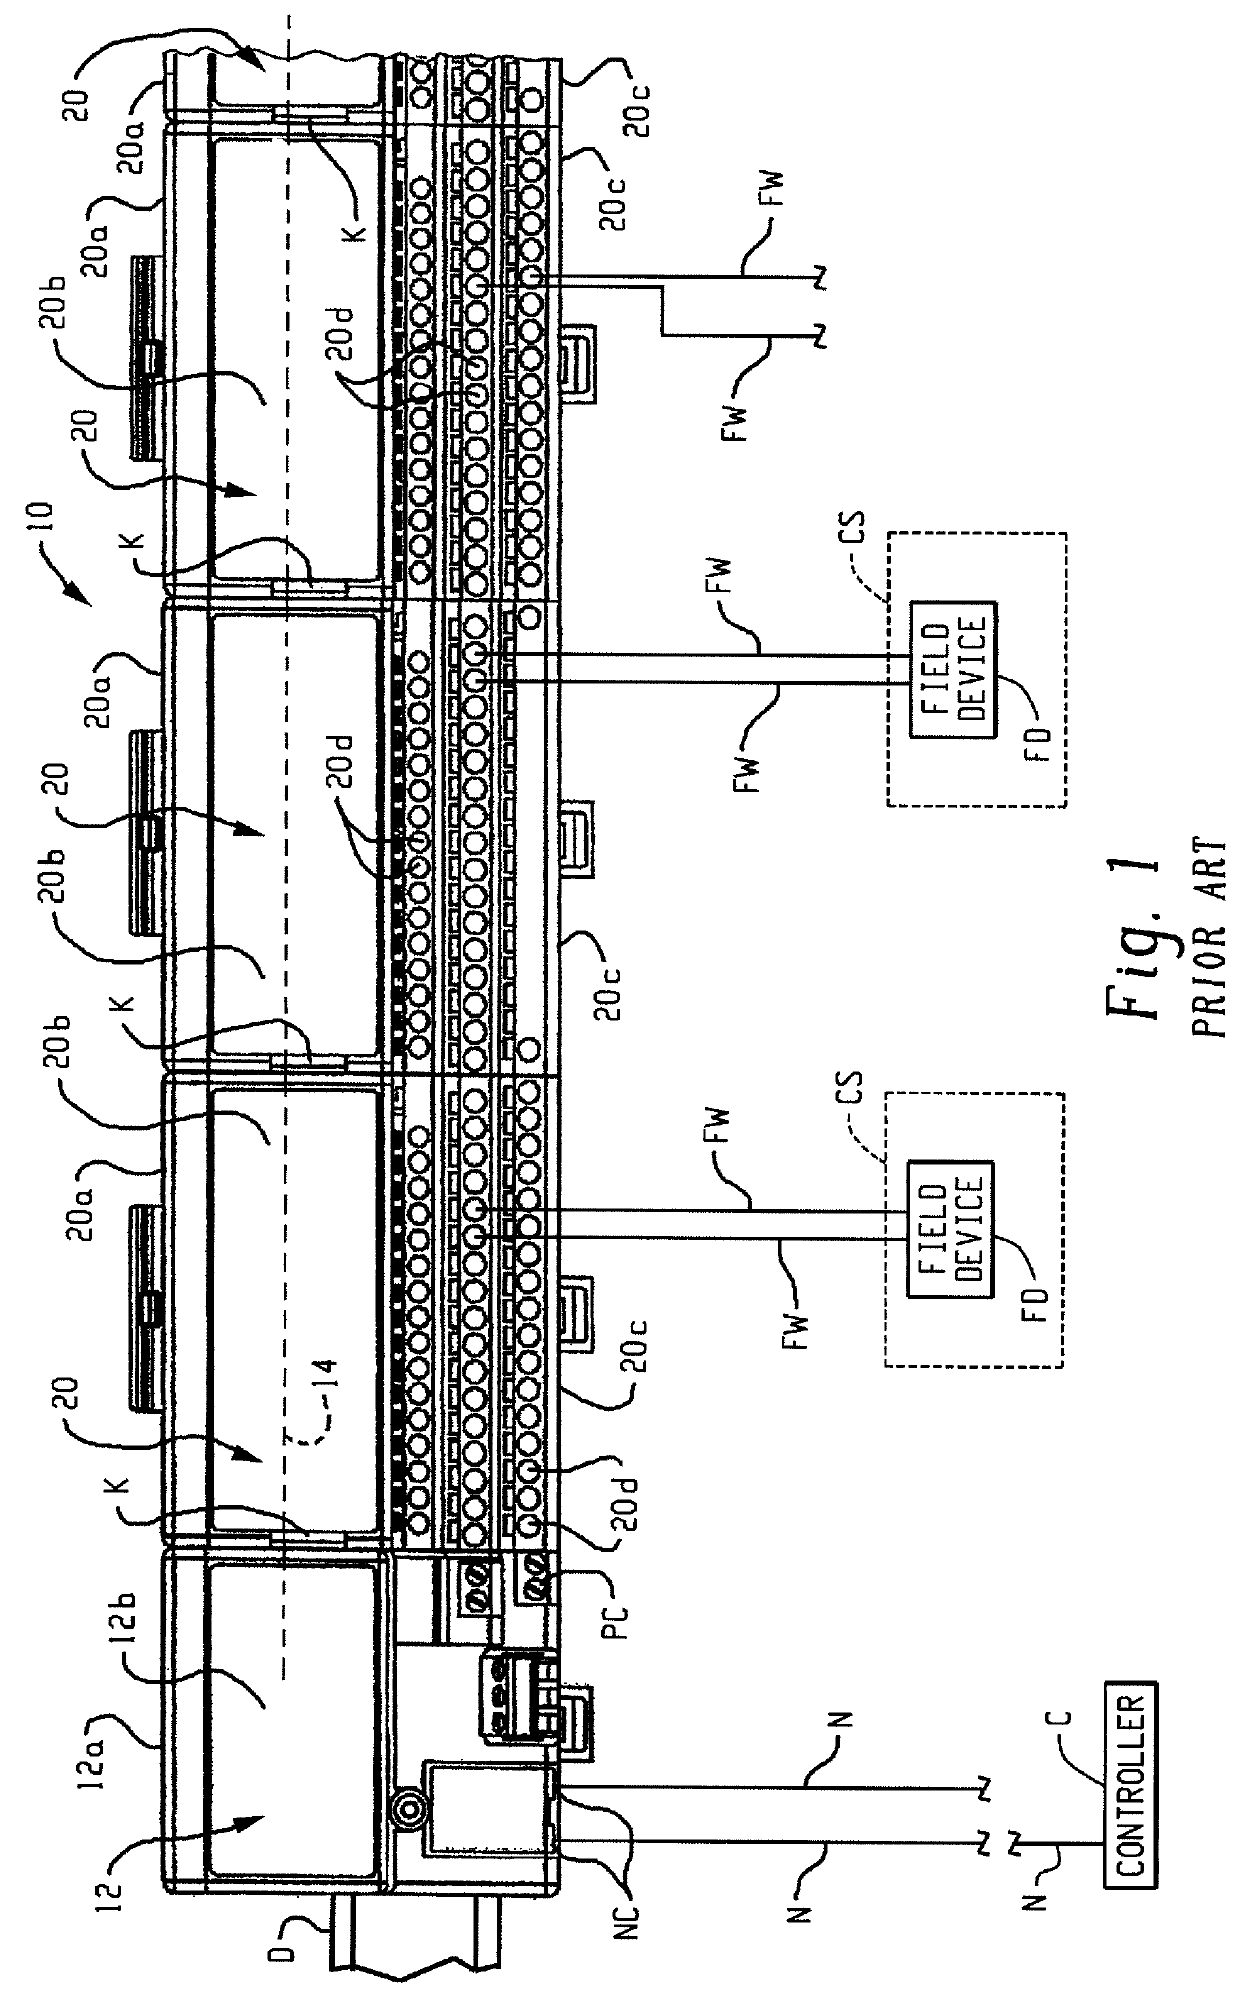 Removable terminal block assembly that permits an I/O base to operate in simplex mode or duplex mode